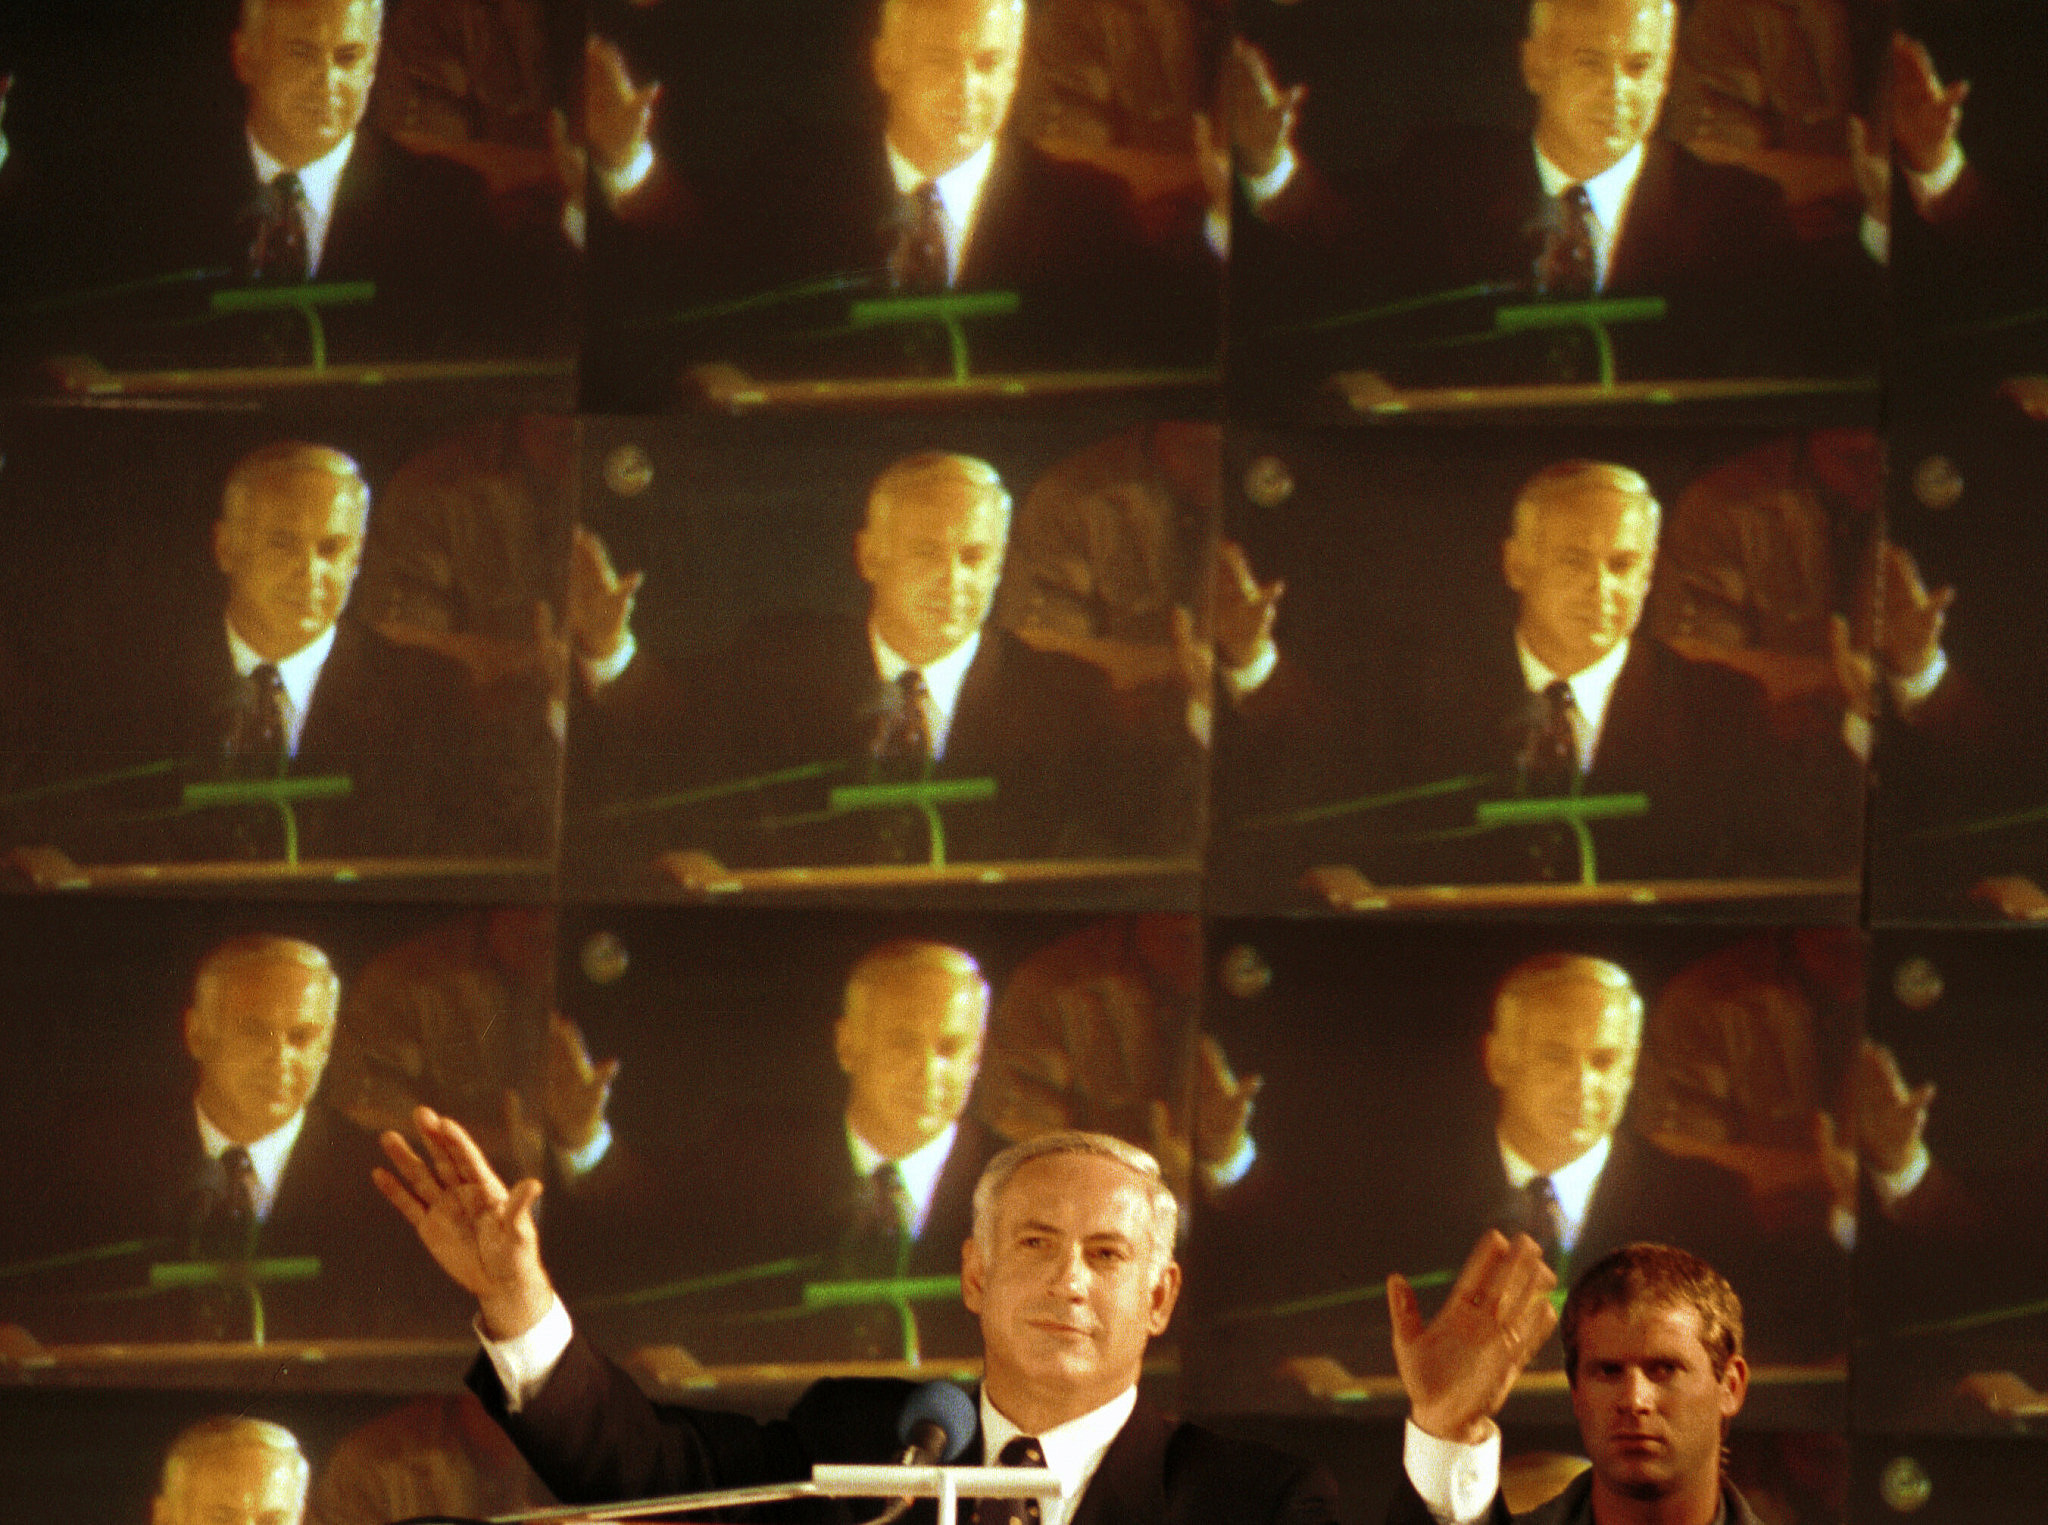 Likud party leader Benjamin Netanyahu raises his hands while giving a victory speech after being elected as prime minister of Israel, June 2, 1996. (Flash90)